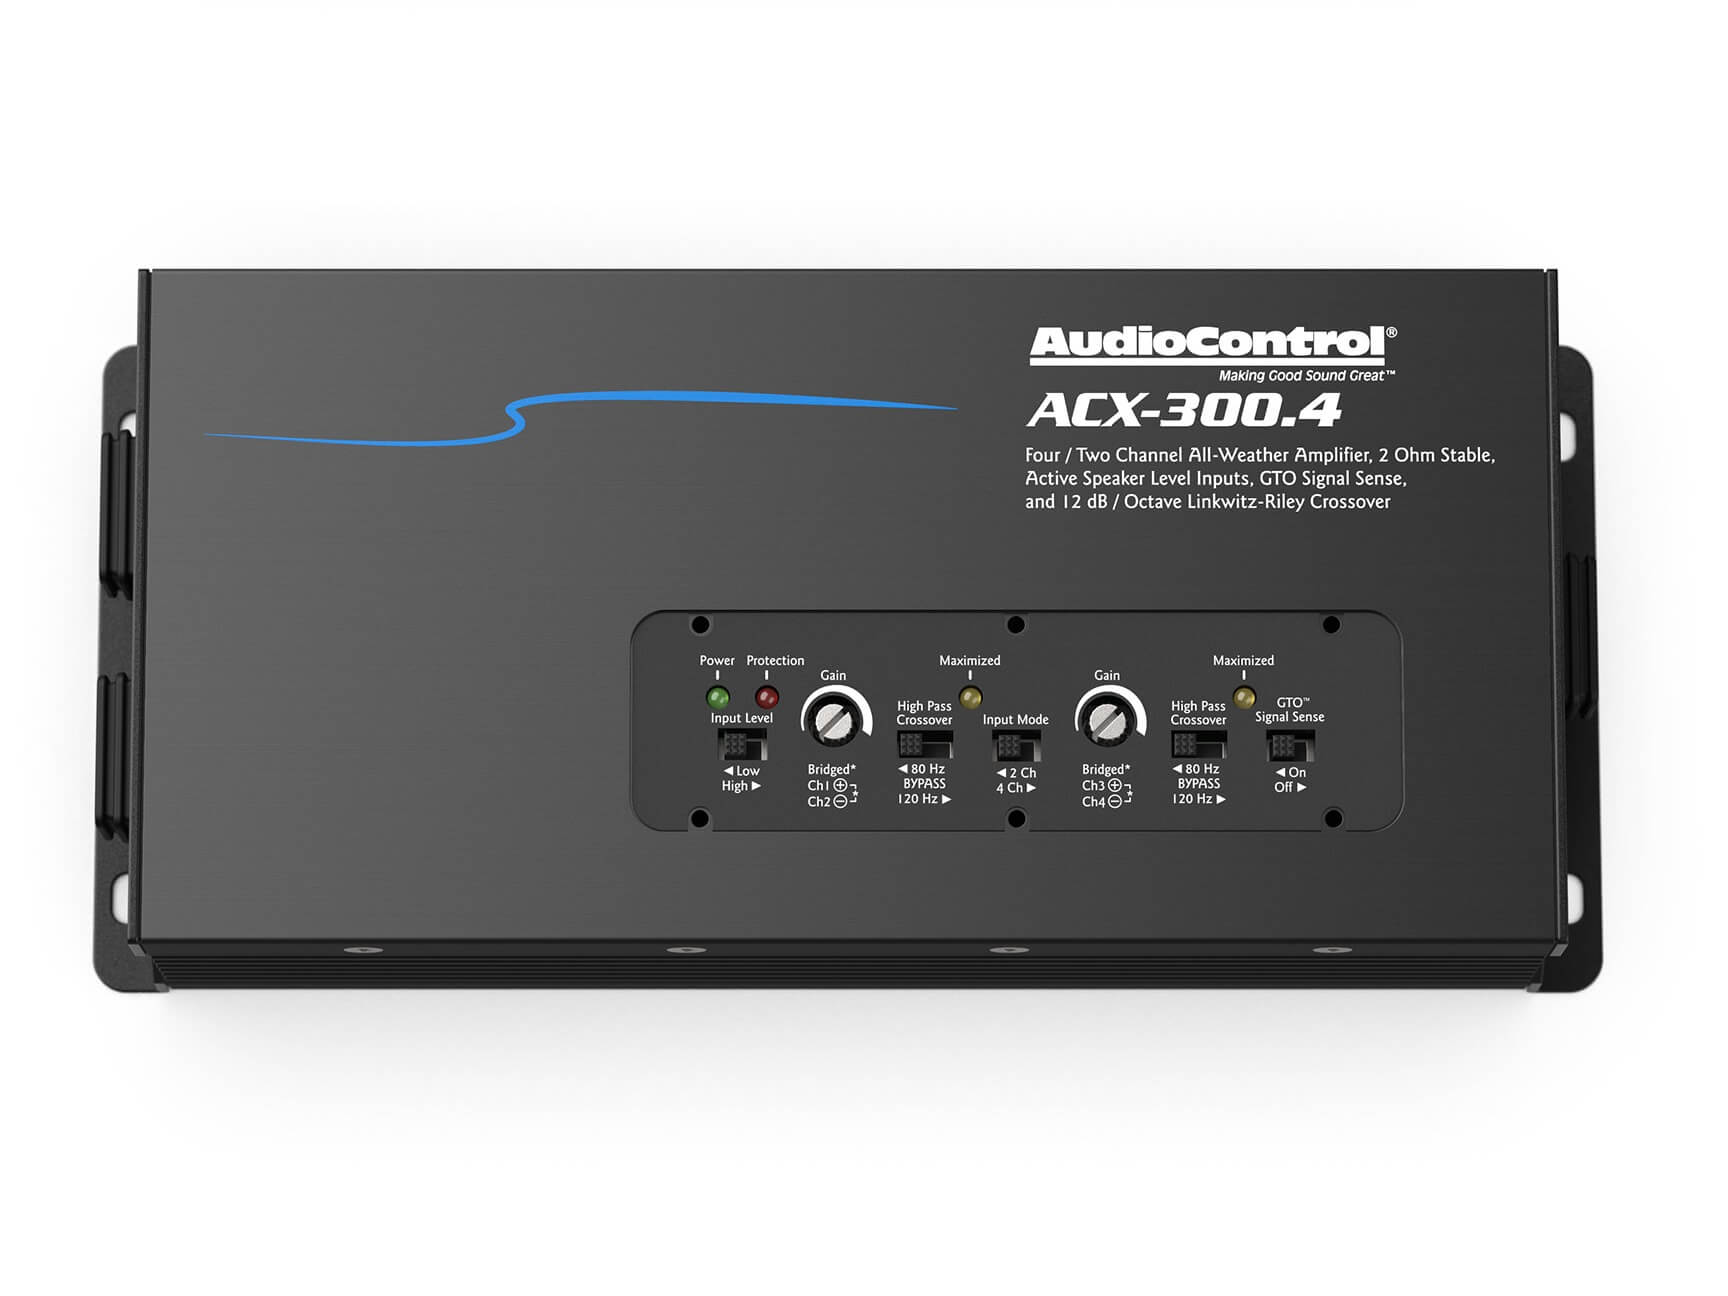 AudioControl ACX-300.4 - Top / Without Cover